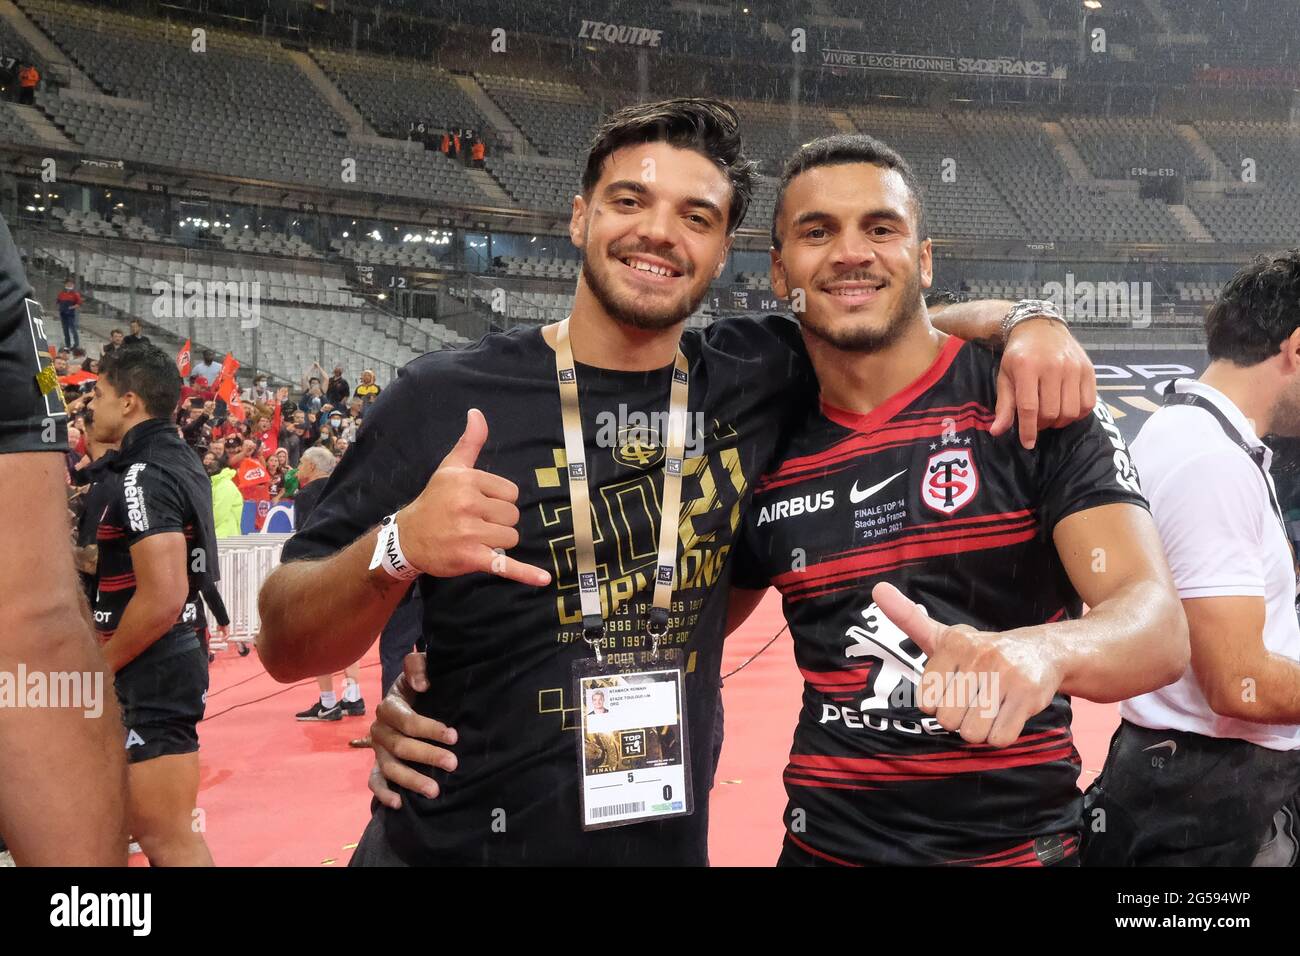 Paris, France. 26th June, 2021. Stade Toulousain Lock ROMAIN NTAMACK after  the victory of the final of French rugby Championship Top 14 between Stade  Toulousain and Stade Rochelais at Stade de France